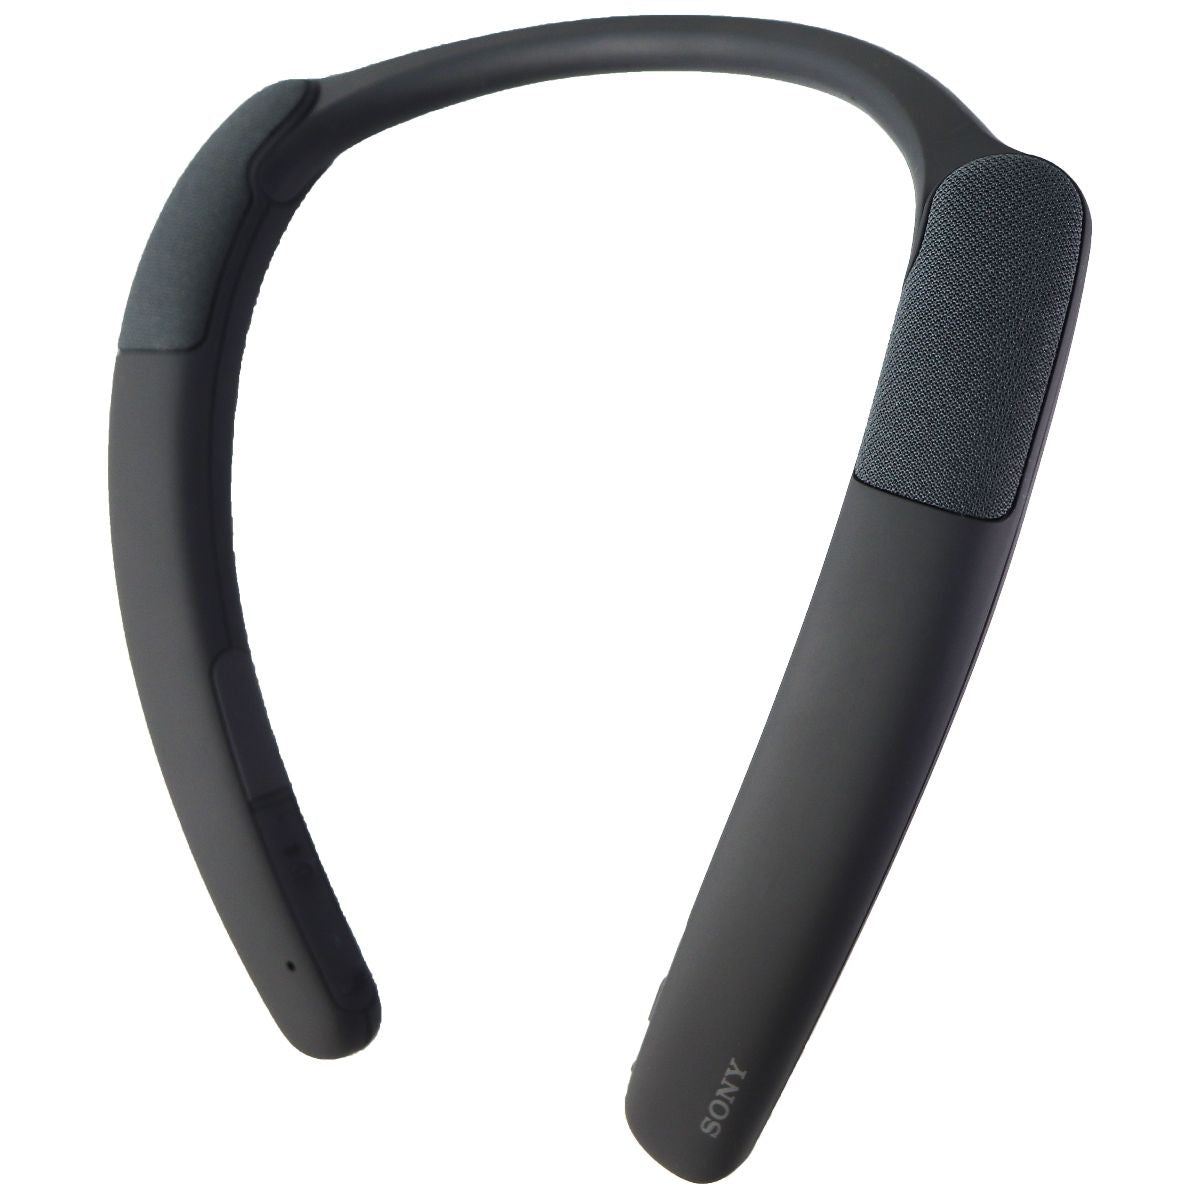 Sony SRS-NB10 Wireless Neckband Bluetooth Speaker - Charcoal Gray Portable Audio - Headphones Sony    - Simple Cell Bulk Wholesale Pricing - USA Seller